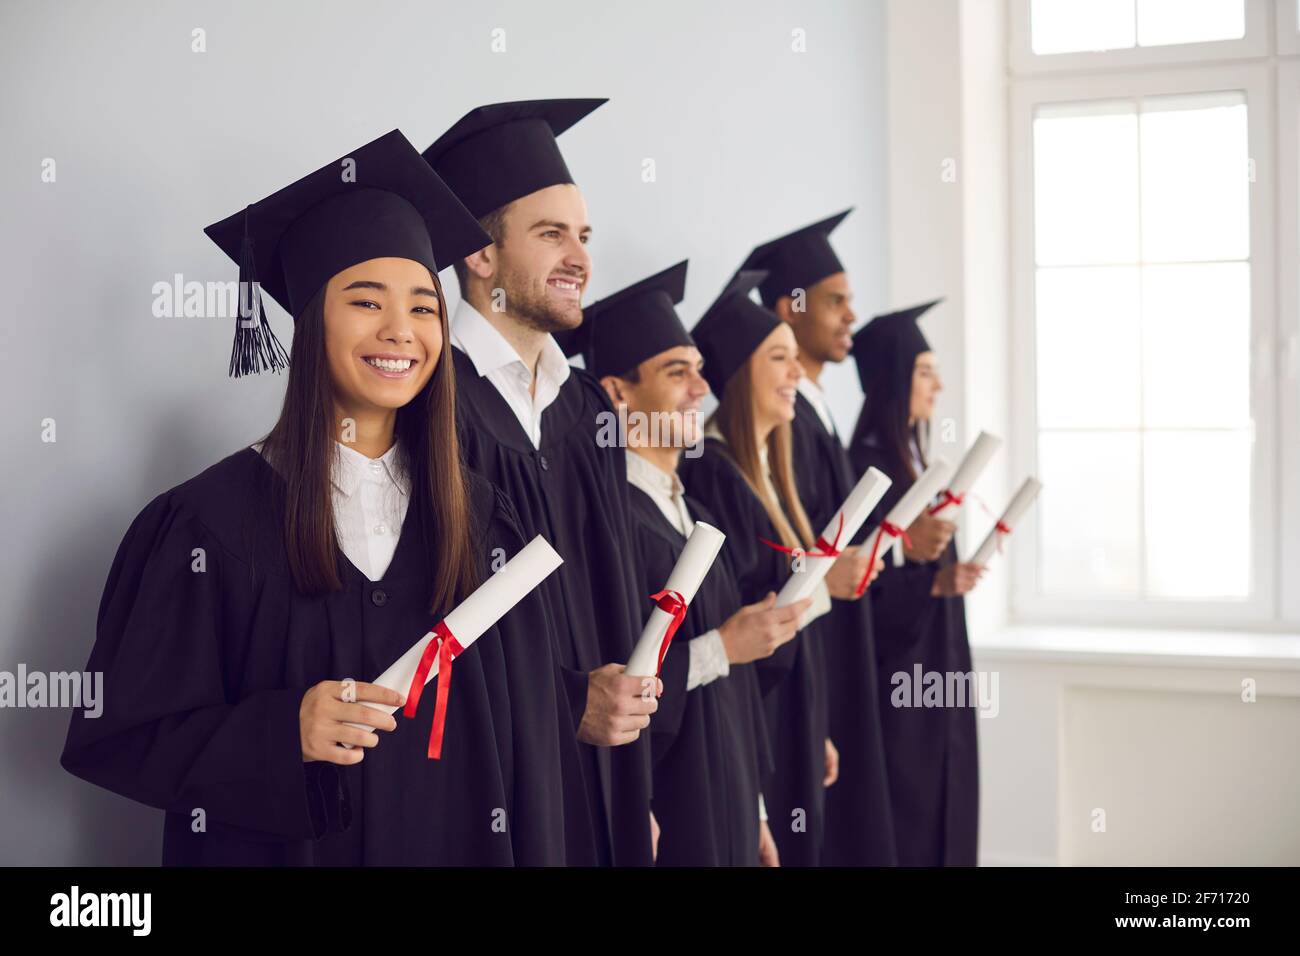 Side view of the university graduation class standing with diplomas in hand near the wall. Stock Photo